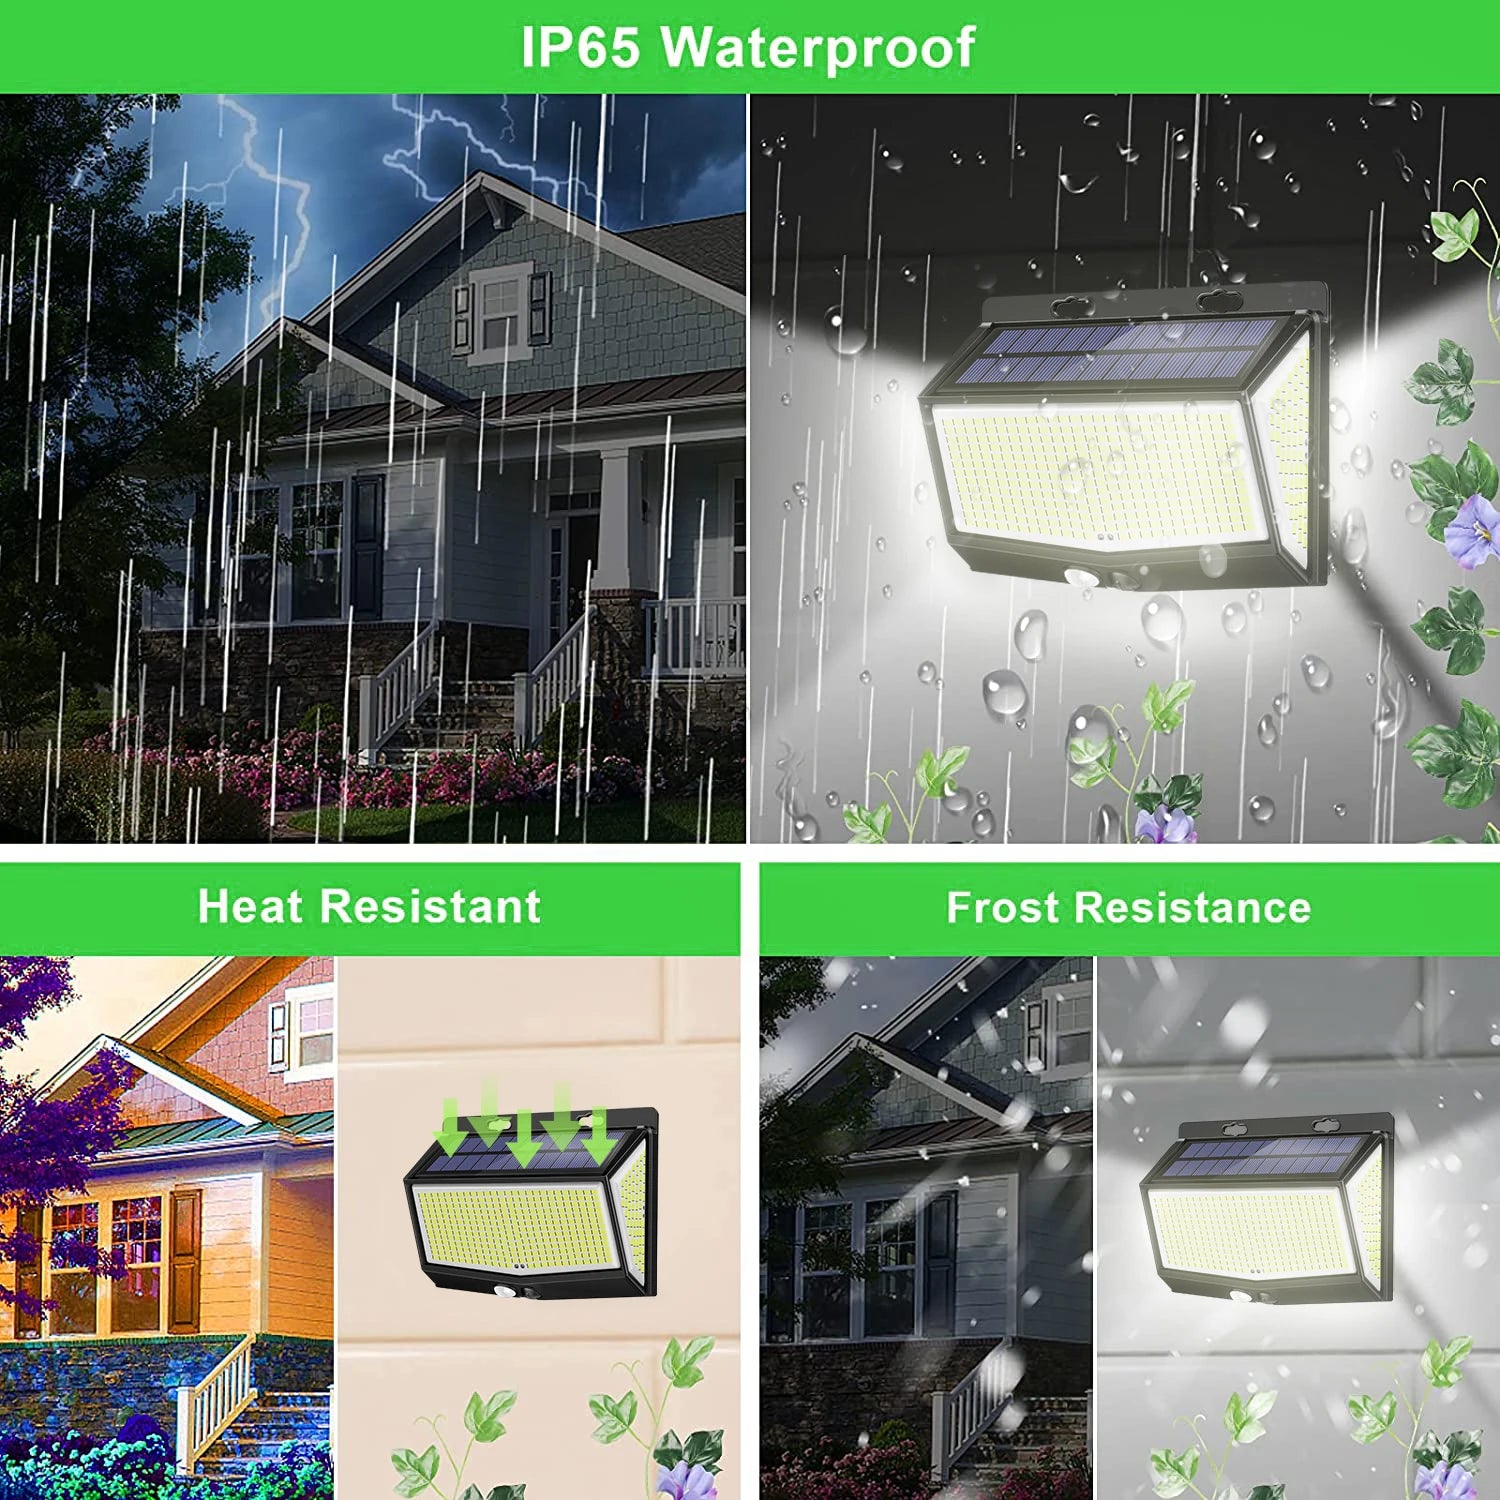 468 LED Solar Light, Waterproof, heat-resistant, and frost-resistant design for outdoor use.